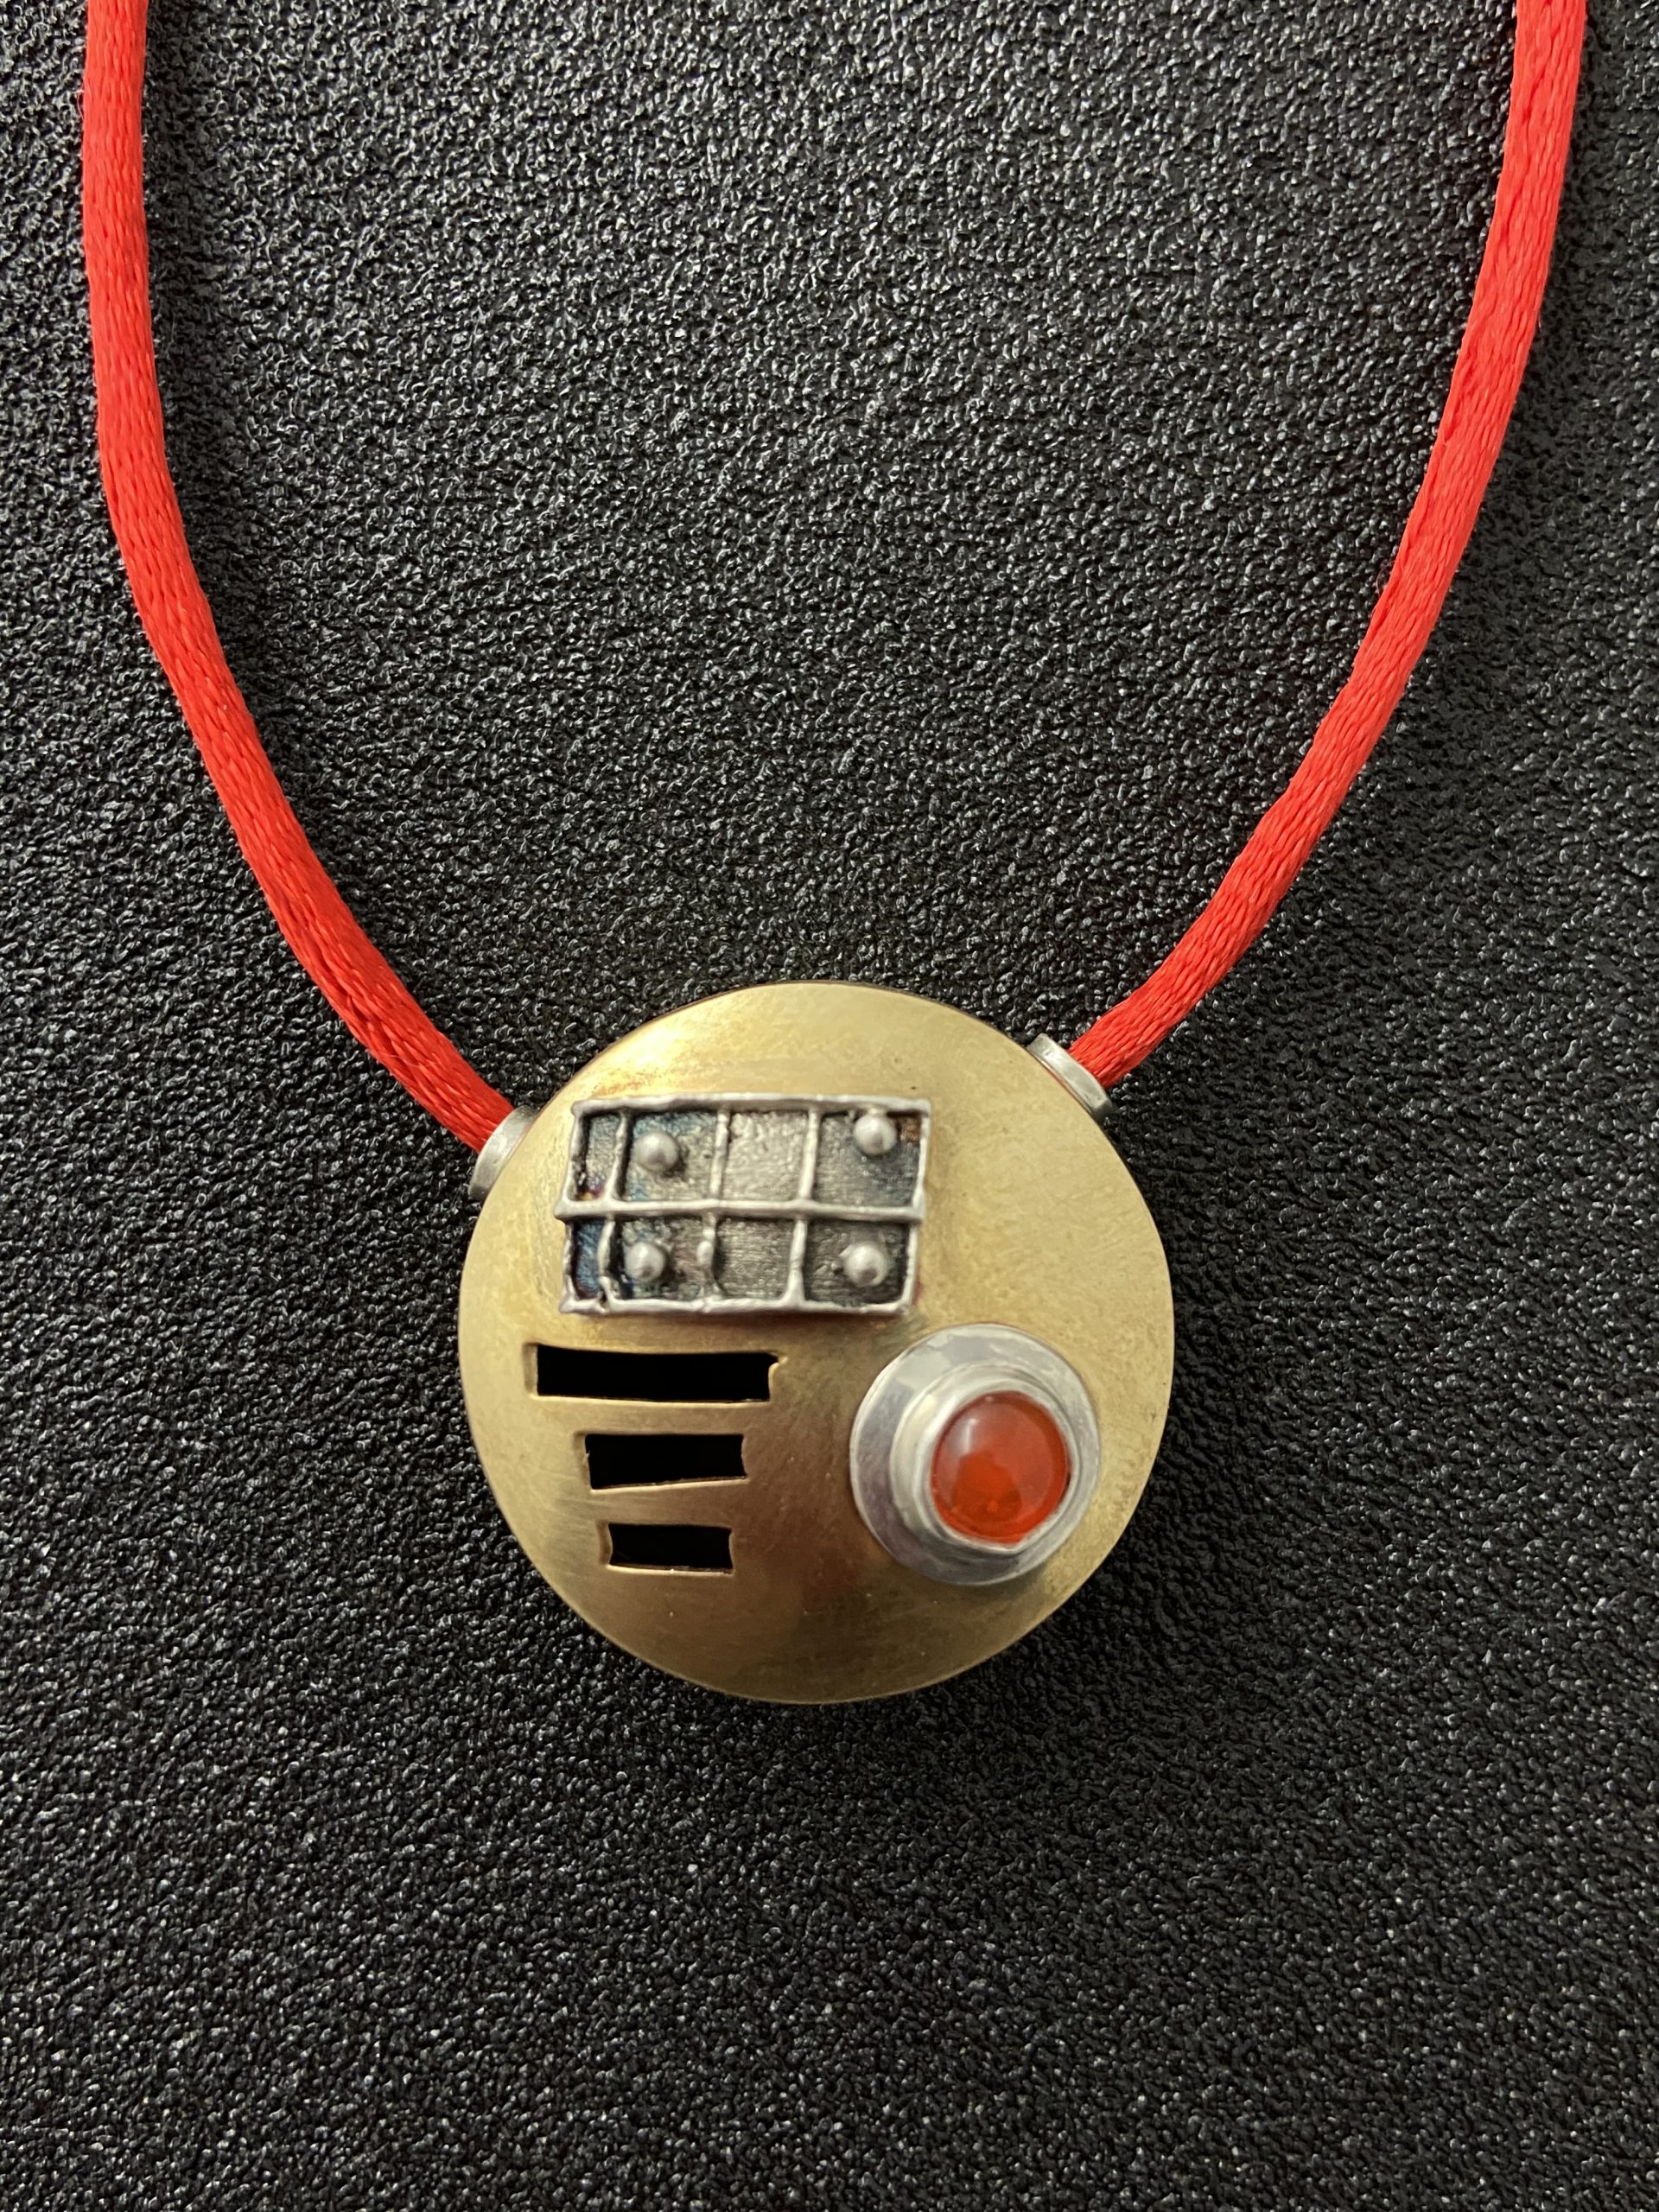 photo of a round hollow form pendant on a red cord